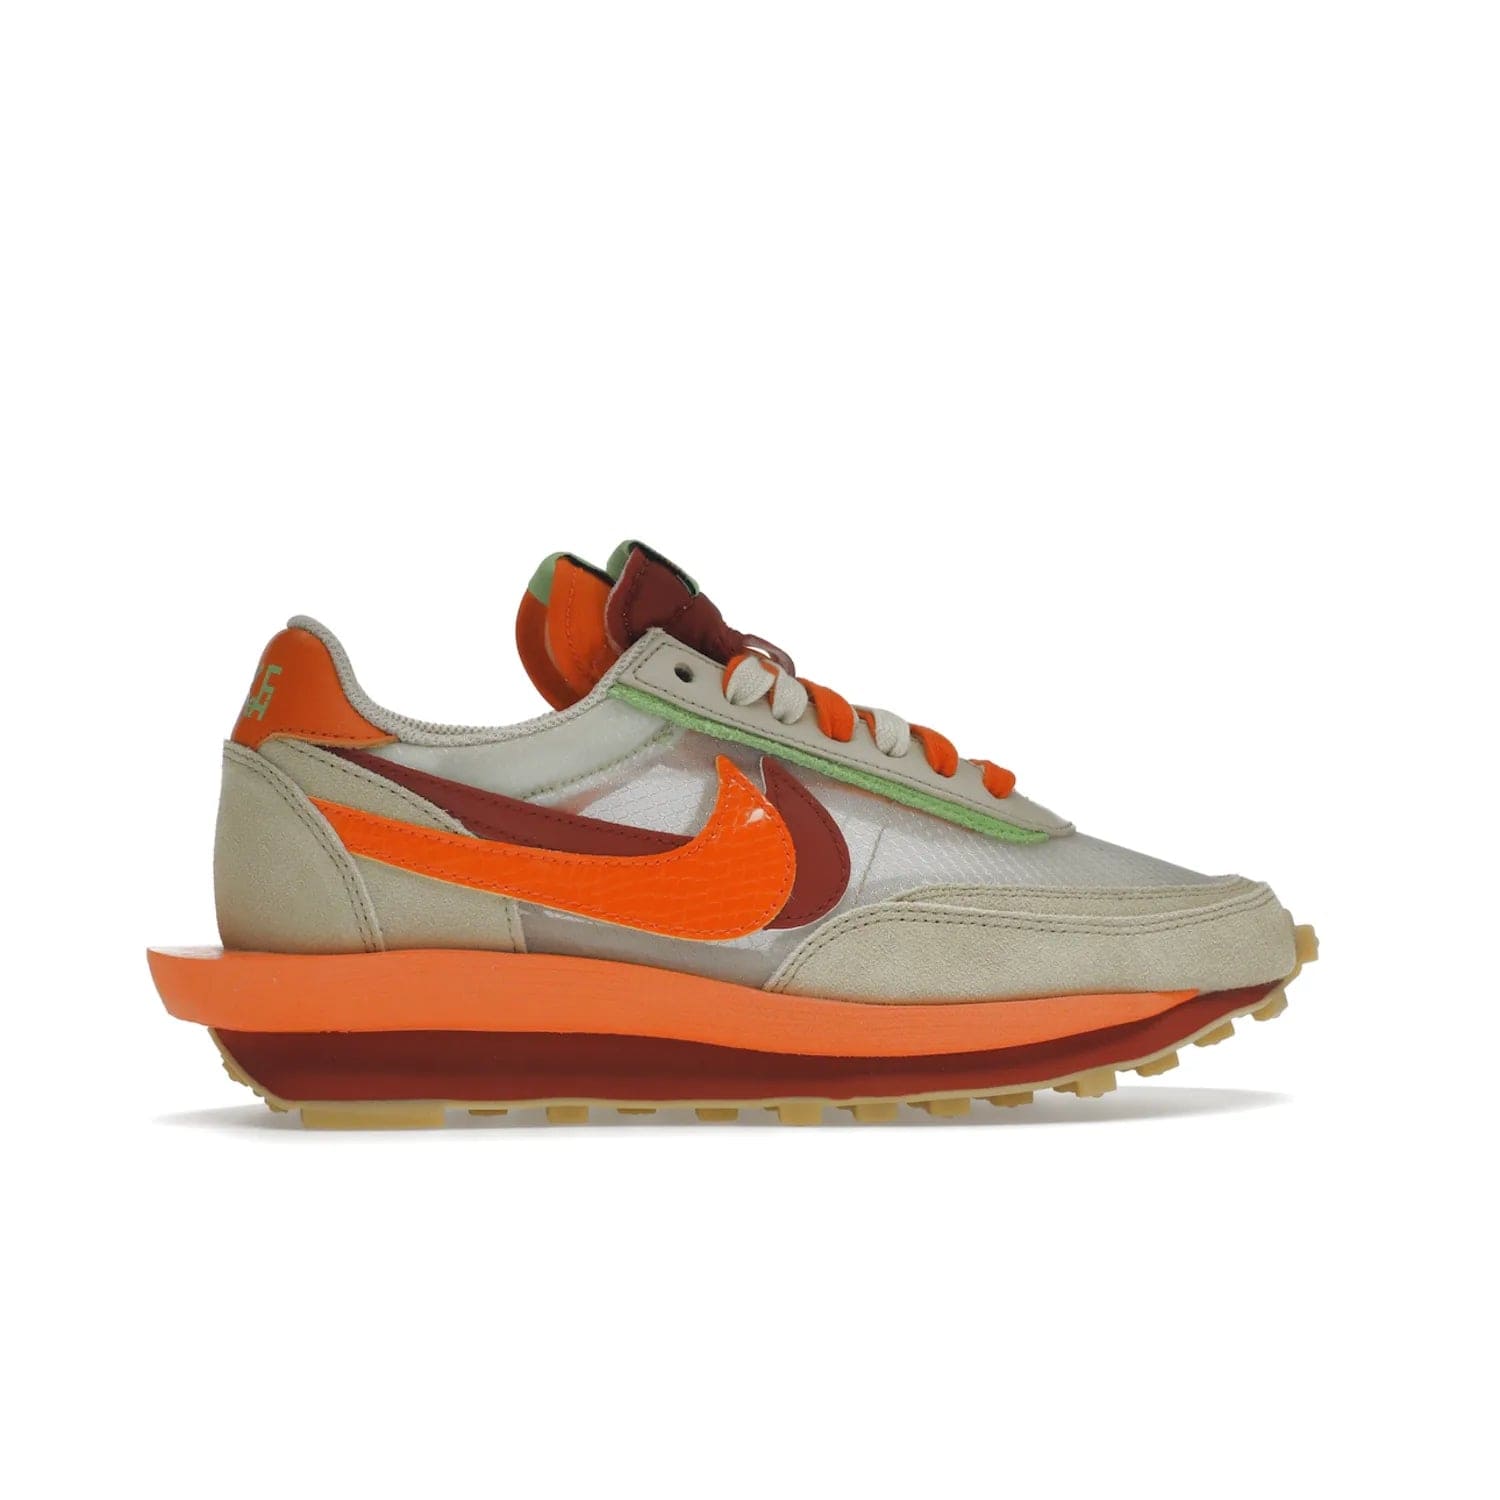 Nike LD Waffle sacai CLOT Kiss of Death Net Orange Blaze - Image 36 - Only at www.BallersClubKickz.com - A bold and stylish Nike LD Waffle sacai CLOT Kiss of Death Net Orange Blaze sneaker featuring a unique off-white, Deep Red & Orange Blaze Swooshes, two-toned stacked sole and doubled tongue. Available in September 2021. Make a statement.